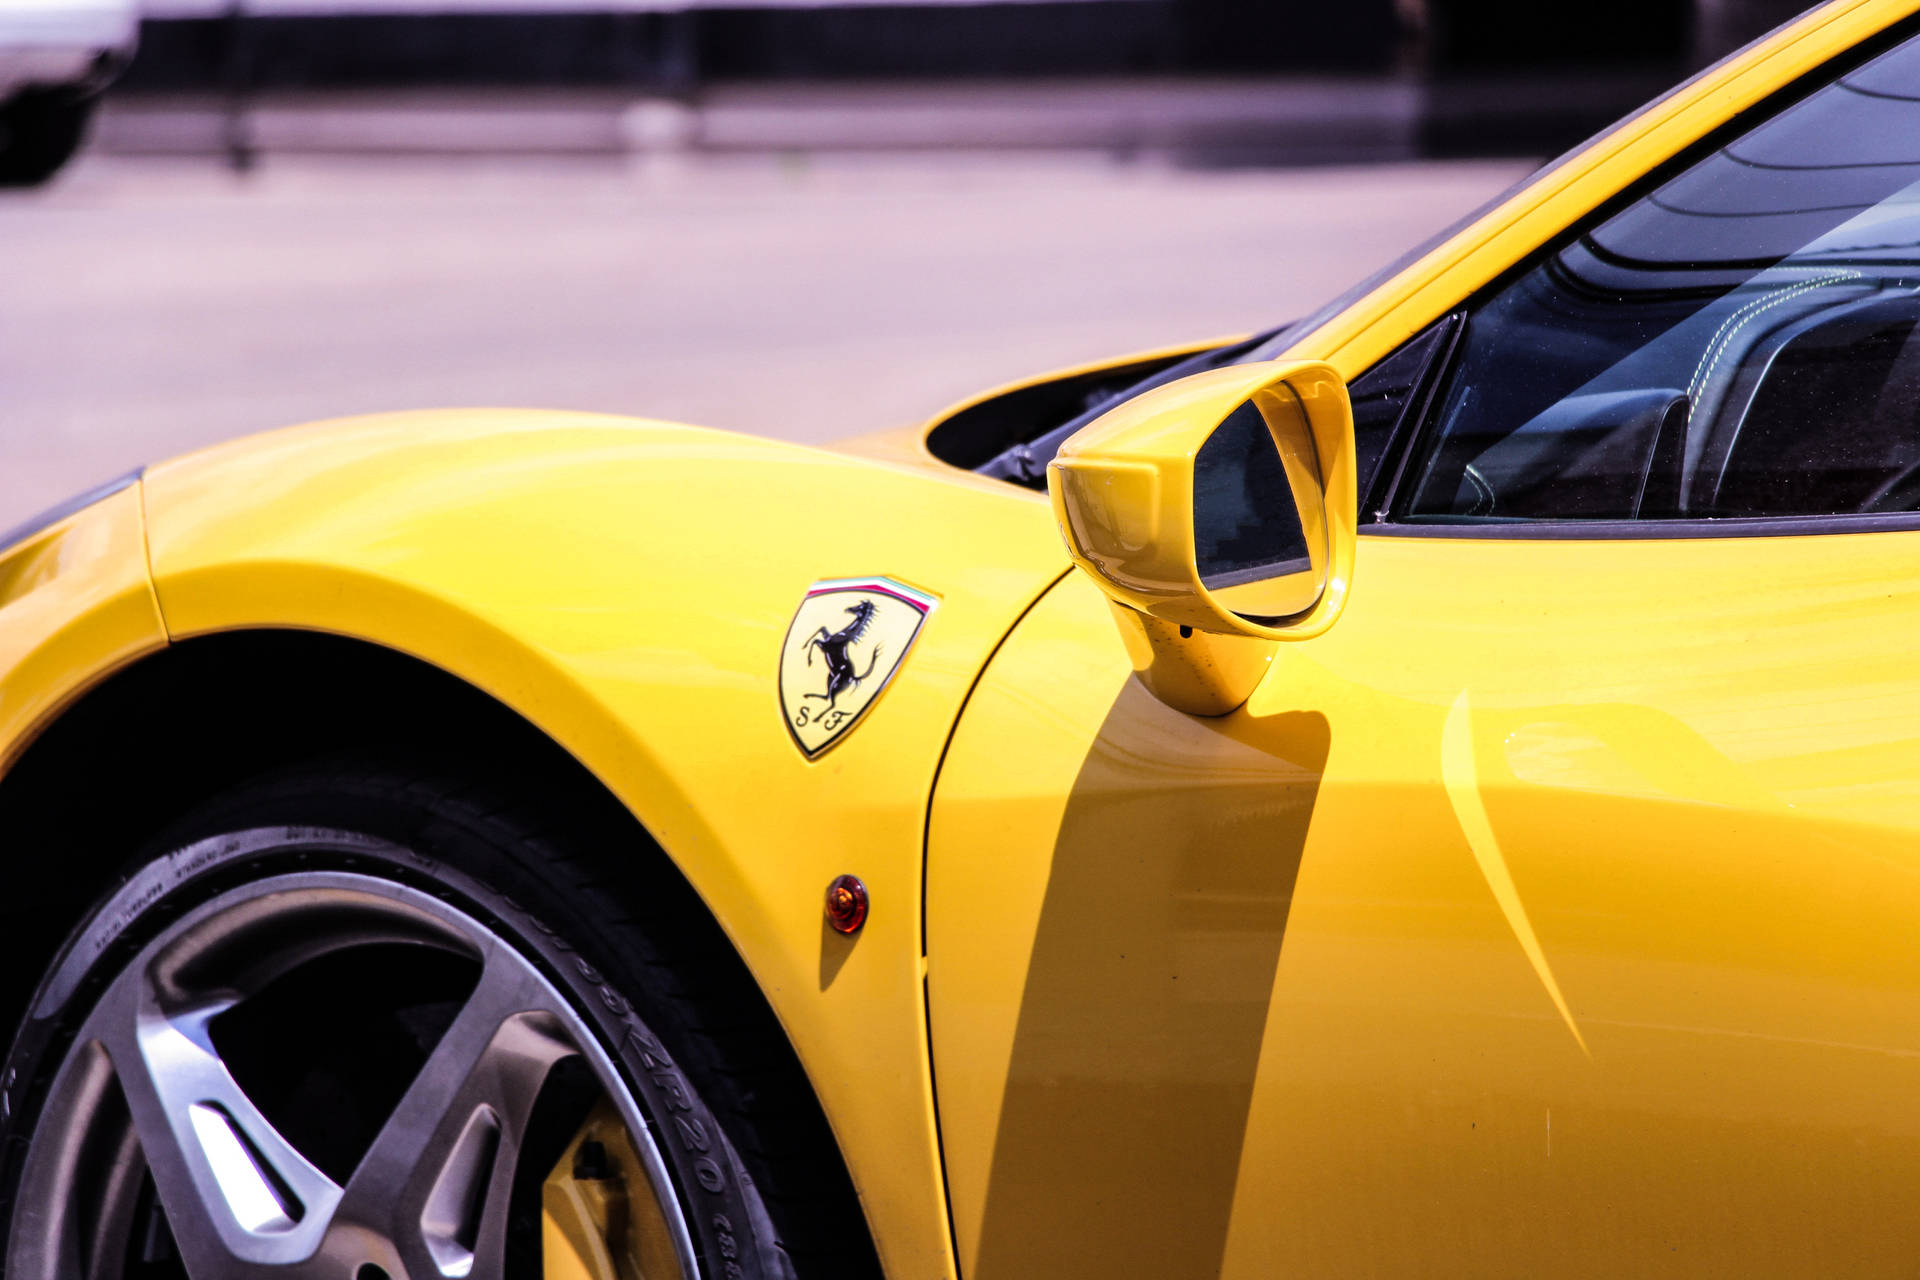 Get ready to feel the rush of the wind in the open road with this yellow Ferrari sports car. Wallpaper